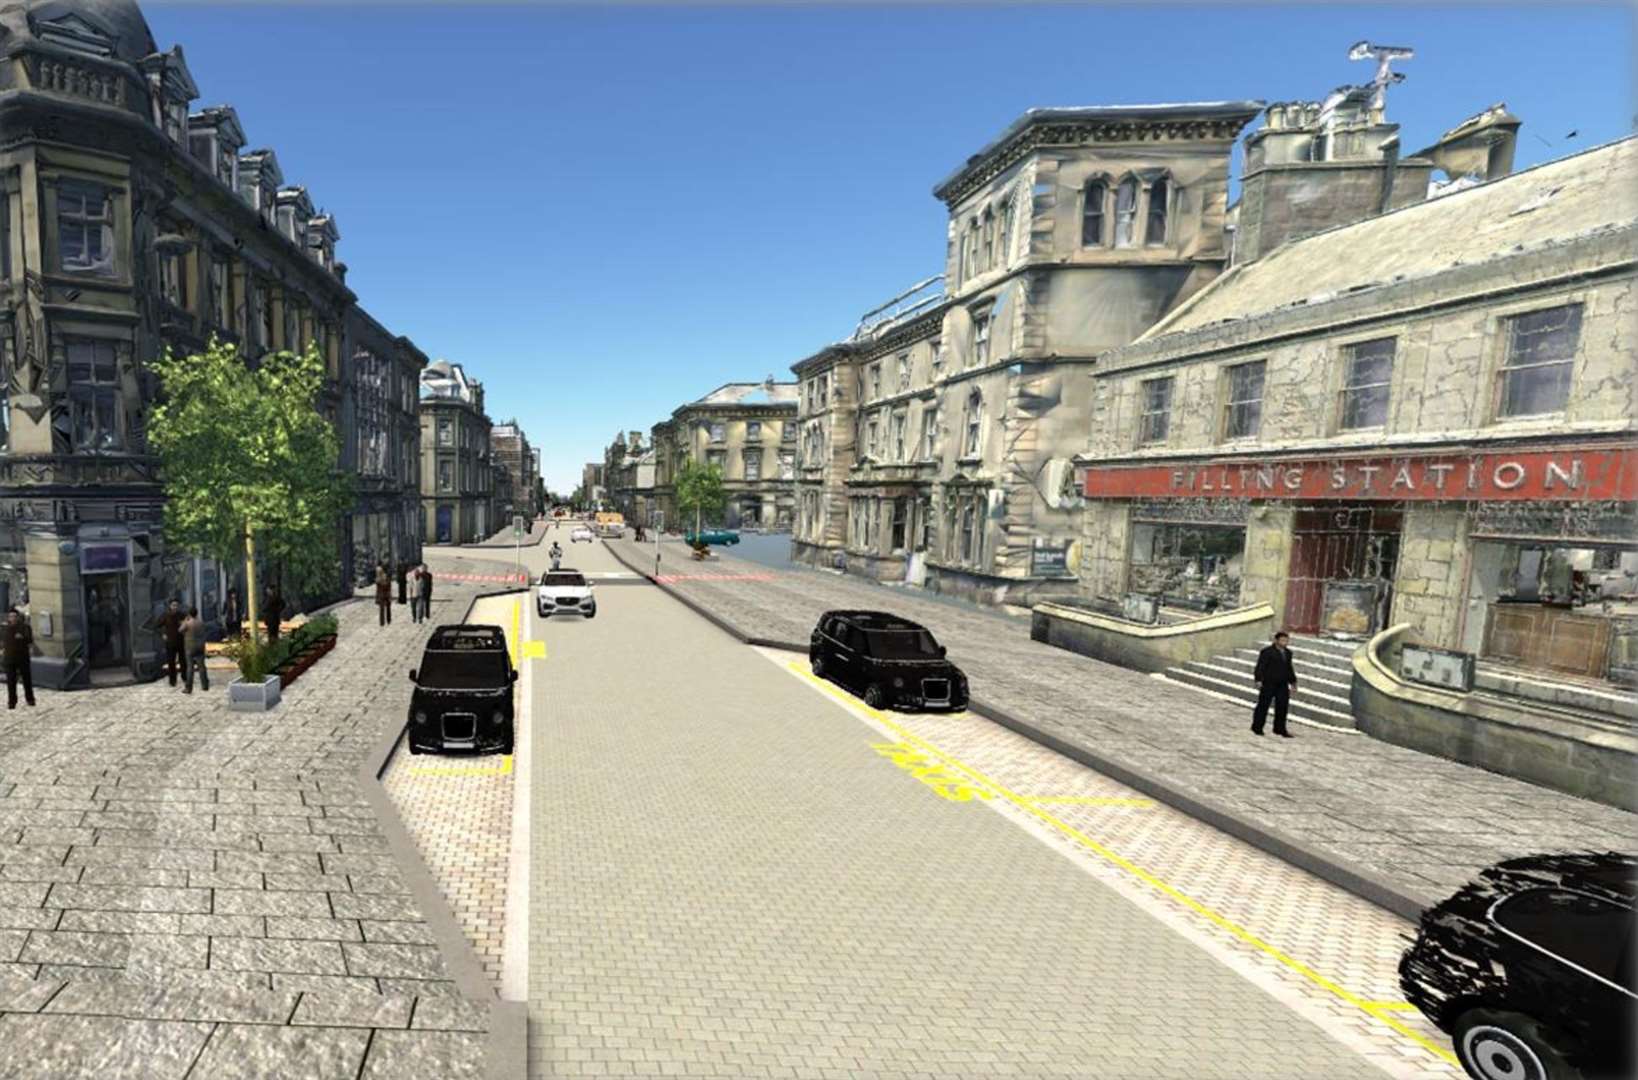 How Academy Street could look near Filling Station.